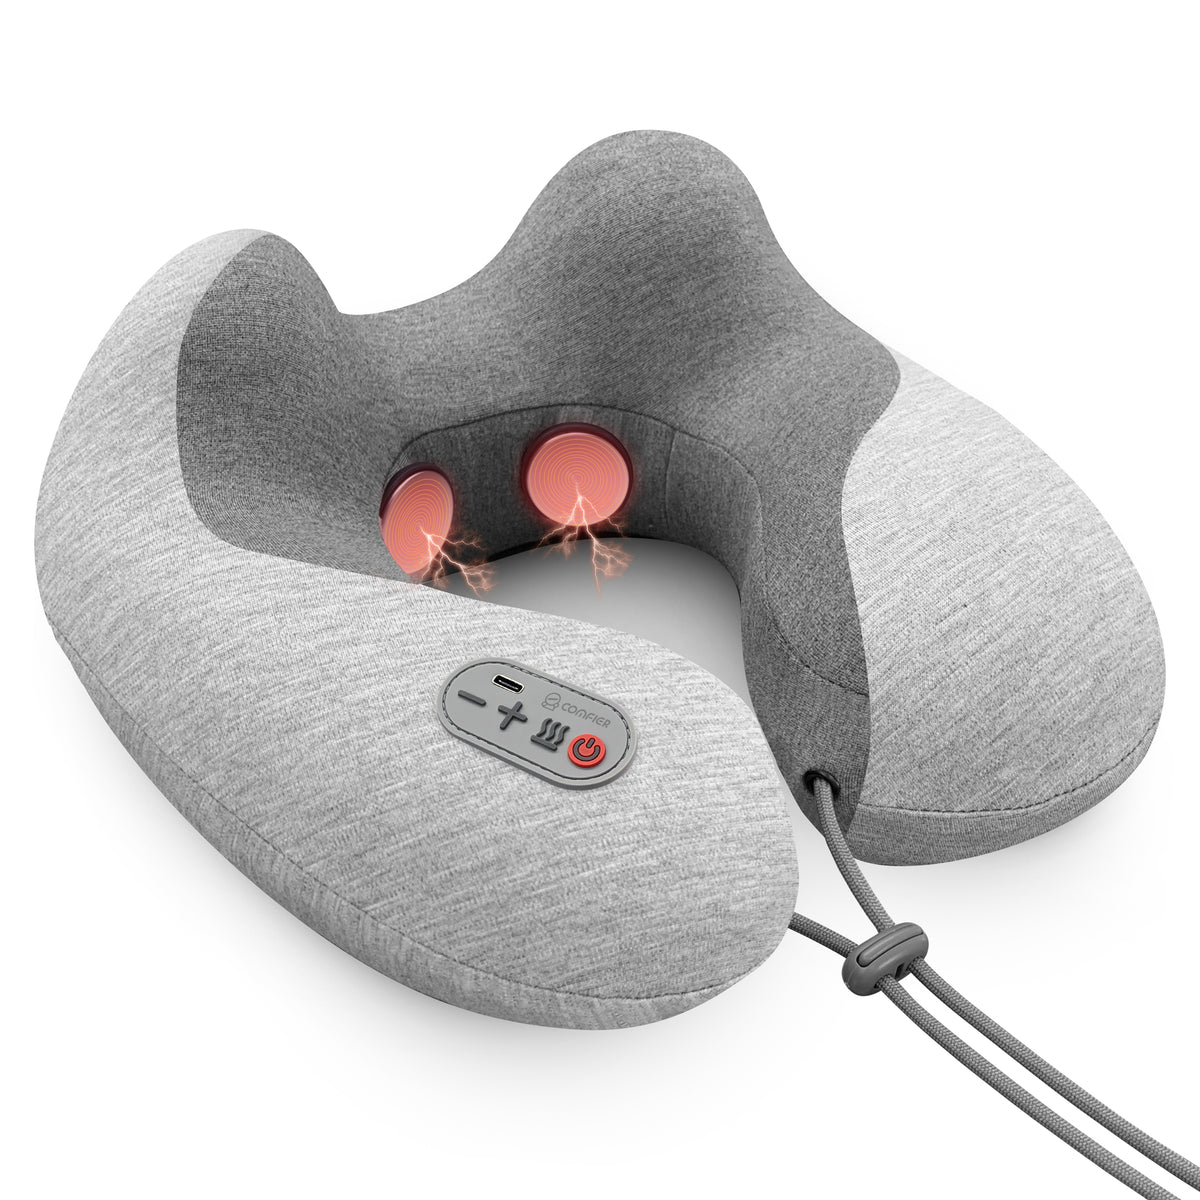 Comfier Massaging Neck Pillow Is a Must for Travelers and More